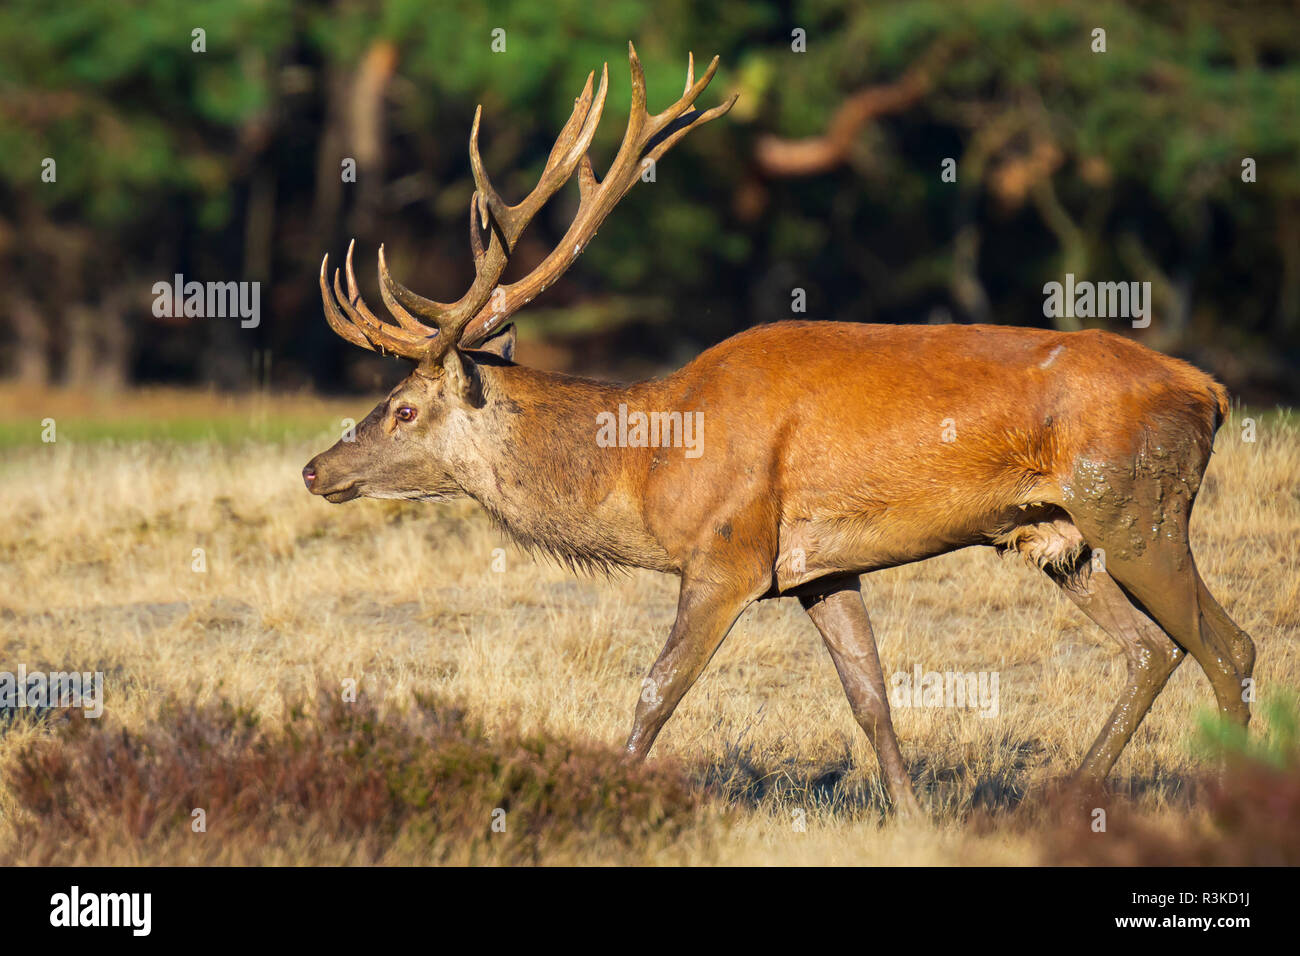 Red deer male, cervus elaphus, with big antlers rutting during mating season on a field near a forest in purple heather blooming.   National parc de H Stock Photo